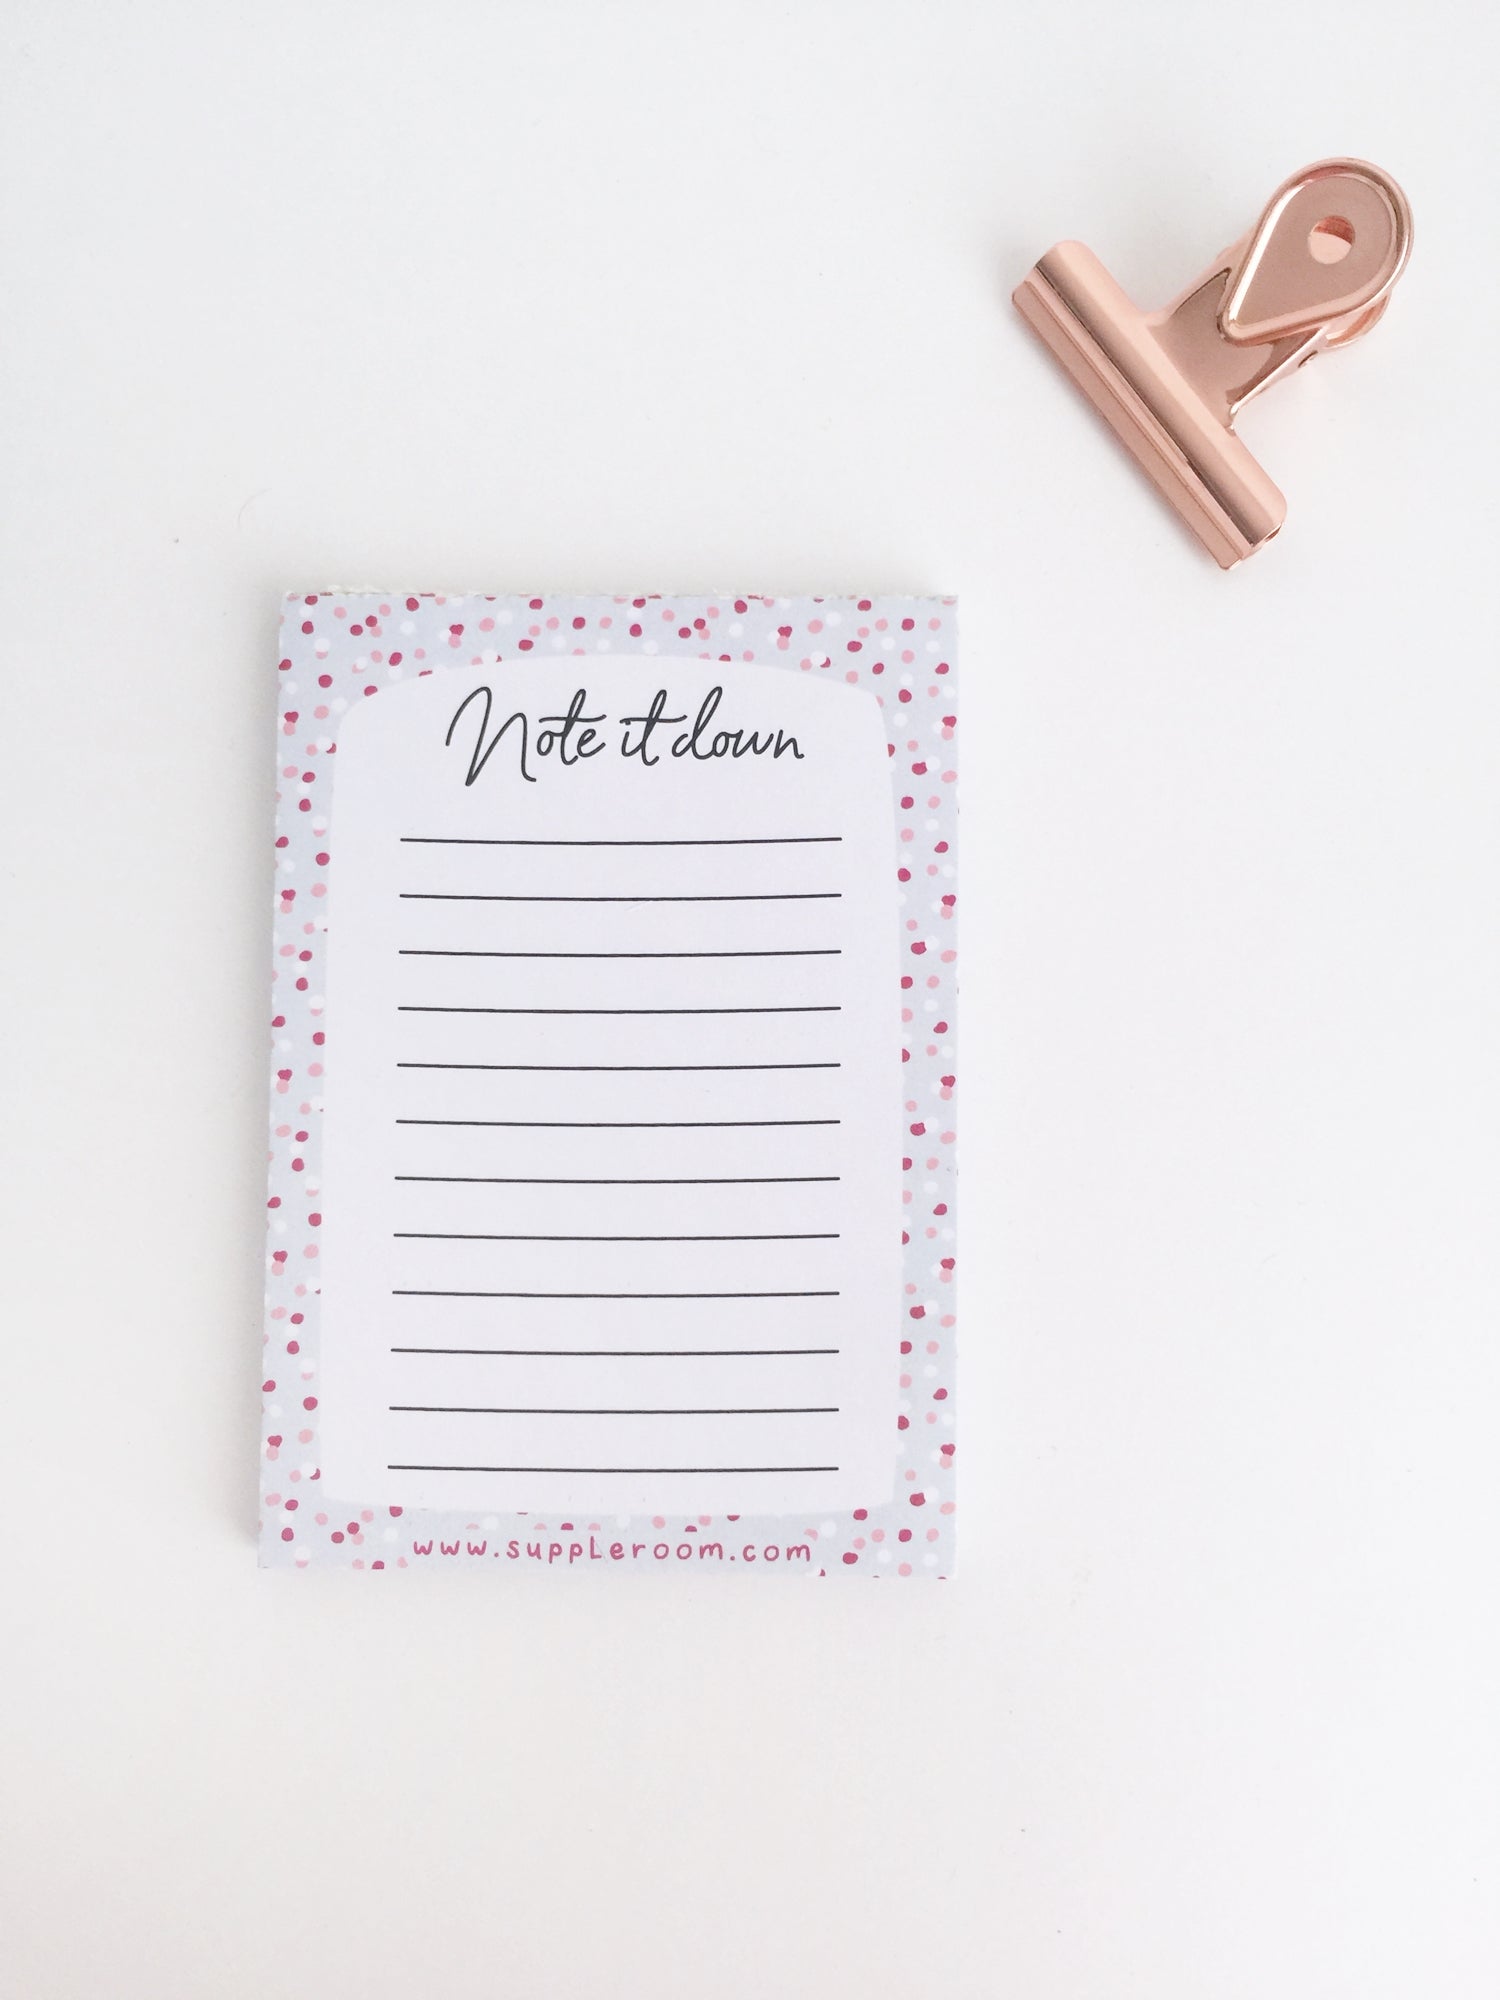 Jot it down Notepad | 50 sheets each - Supple Room